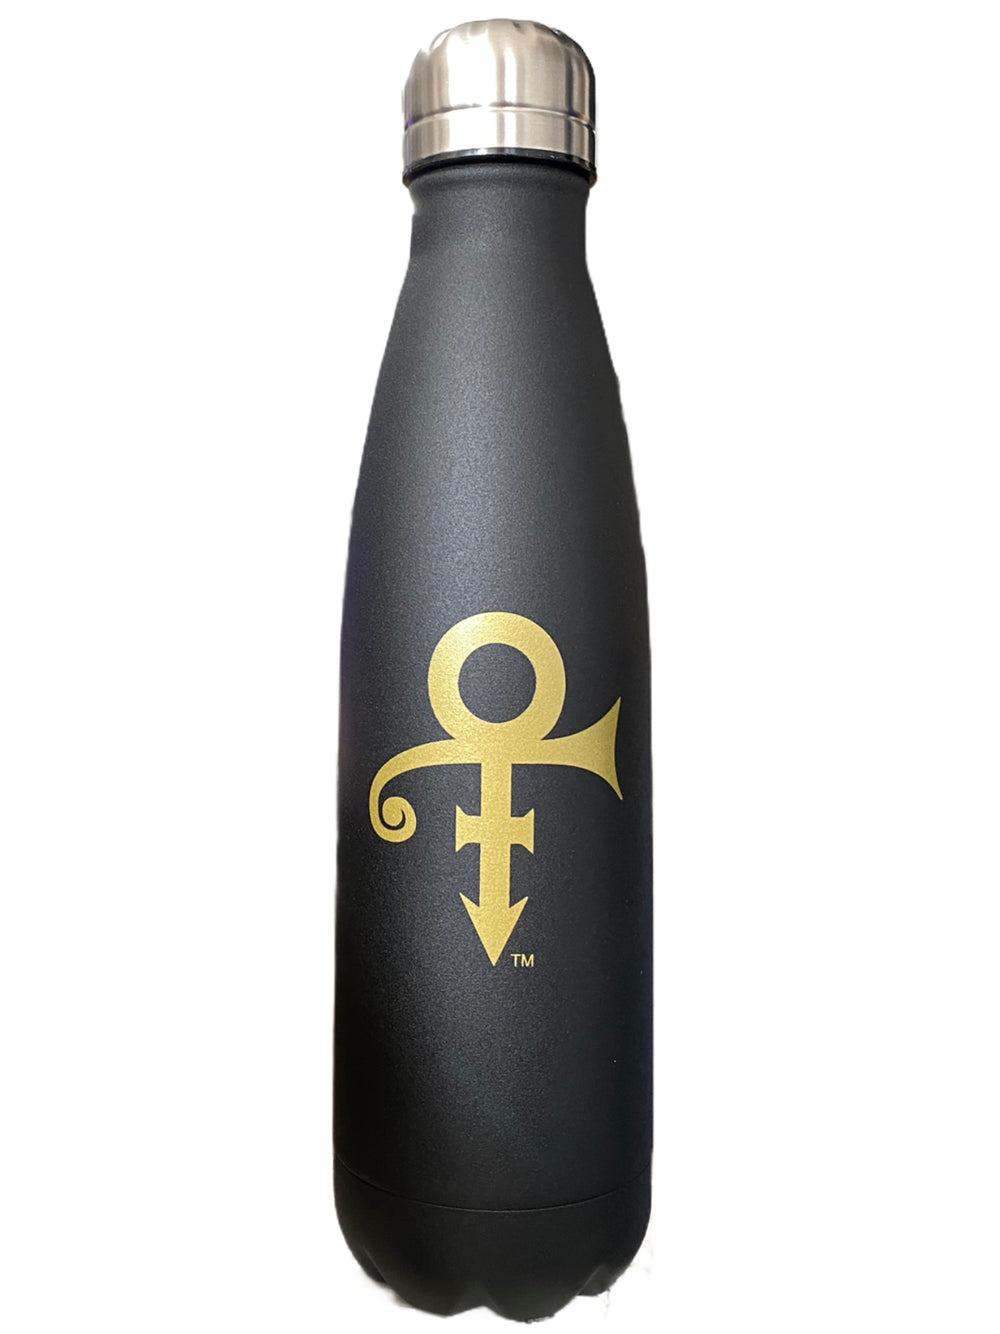 Prince – Official Aluminium Drinks Flask Black With Gold Love Symbol Brand New Travel